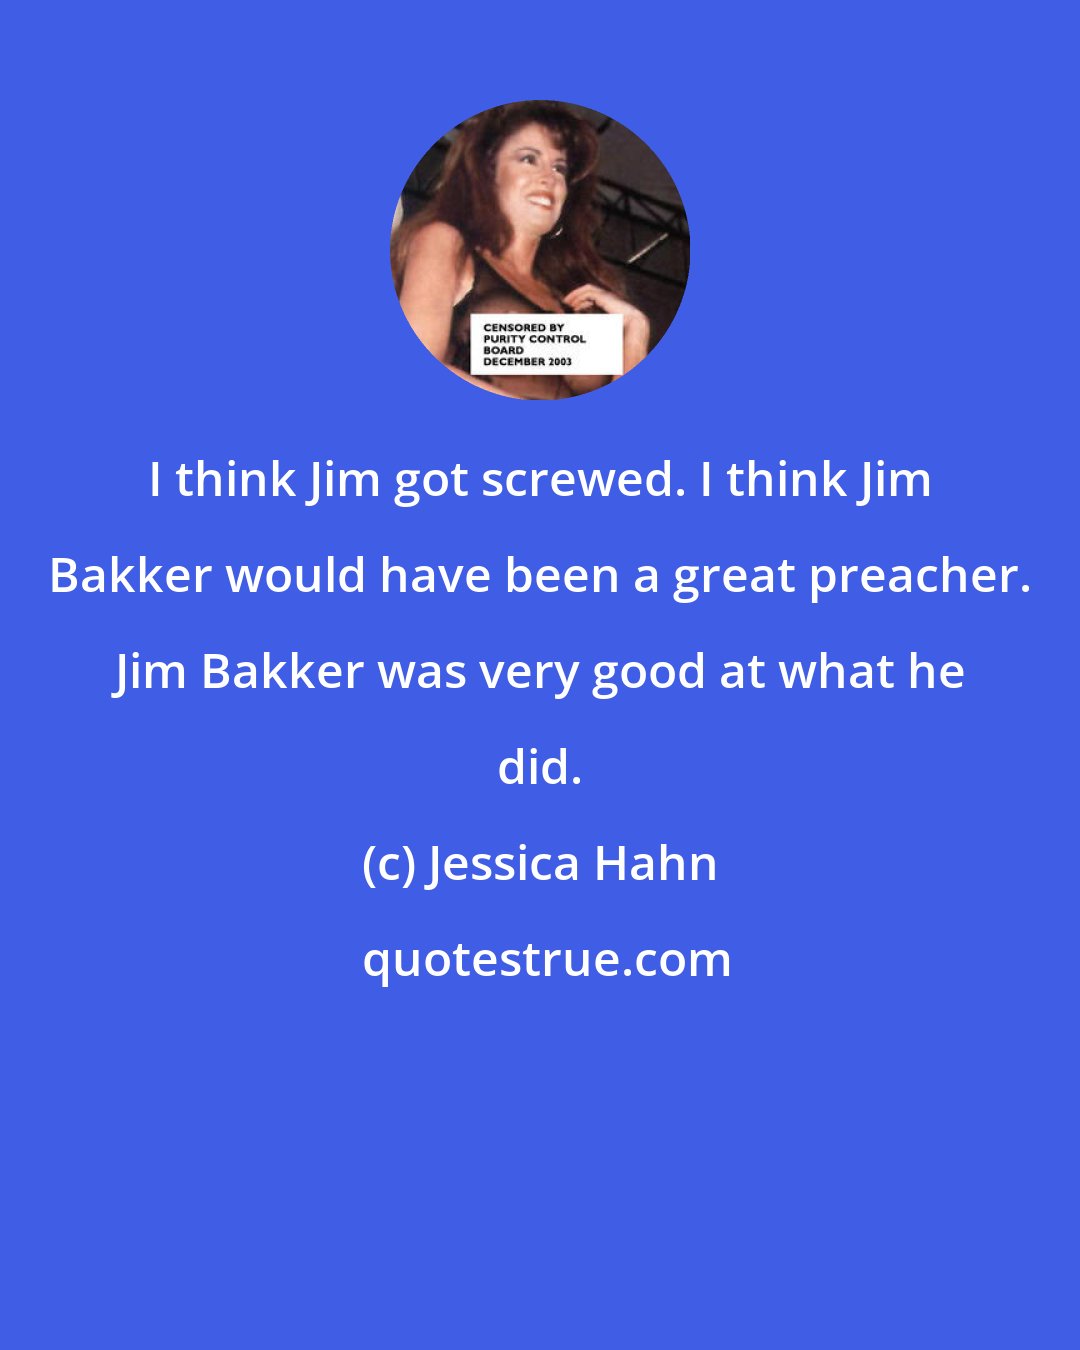 Jessica Hahn: I think Jim got screwed. I think Jim Bakker would have been a great preacher. Jim Bakker was very good at what he did.